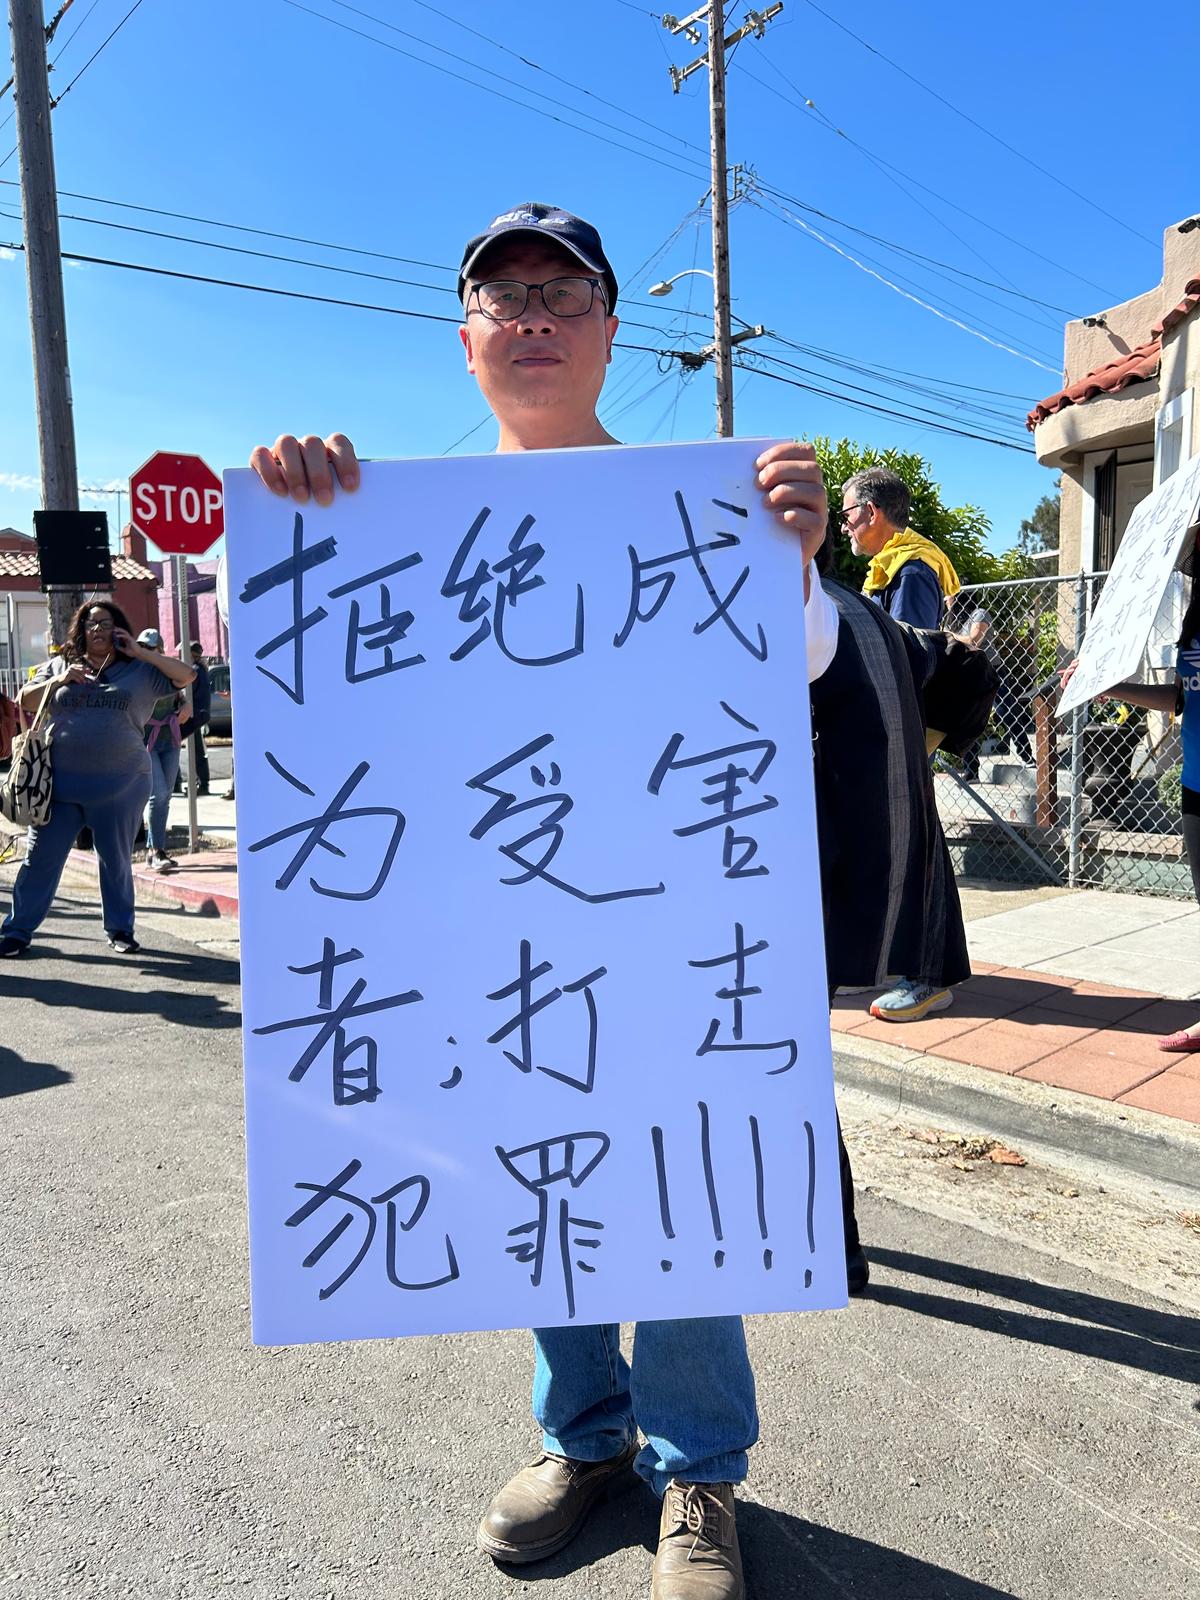 A man holds a sign in Chinese as locals concerned about public safety issues gather outside of a "Community Safety" meeting attended by local government and law enforcement officials at the Genesis Worship Center in East Oakland, Calif., on Sept. 9, 2023. (Courtesy of Loretta Breuning)